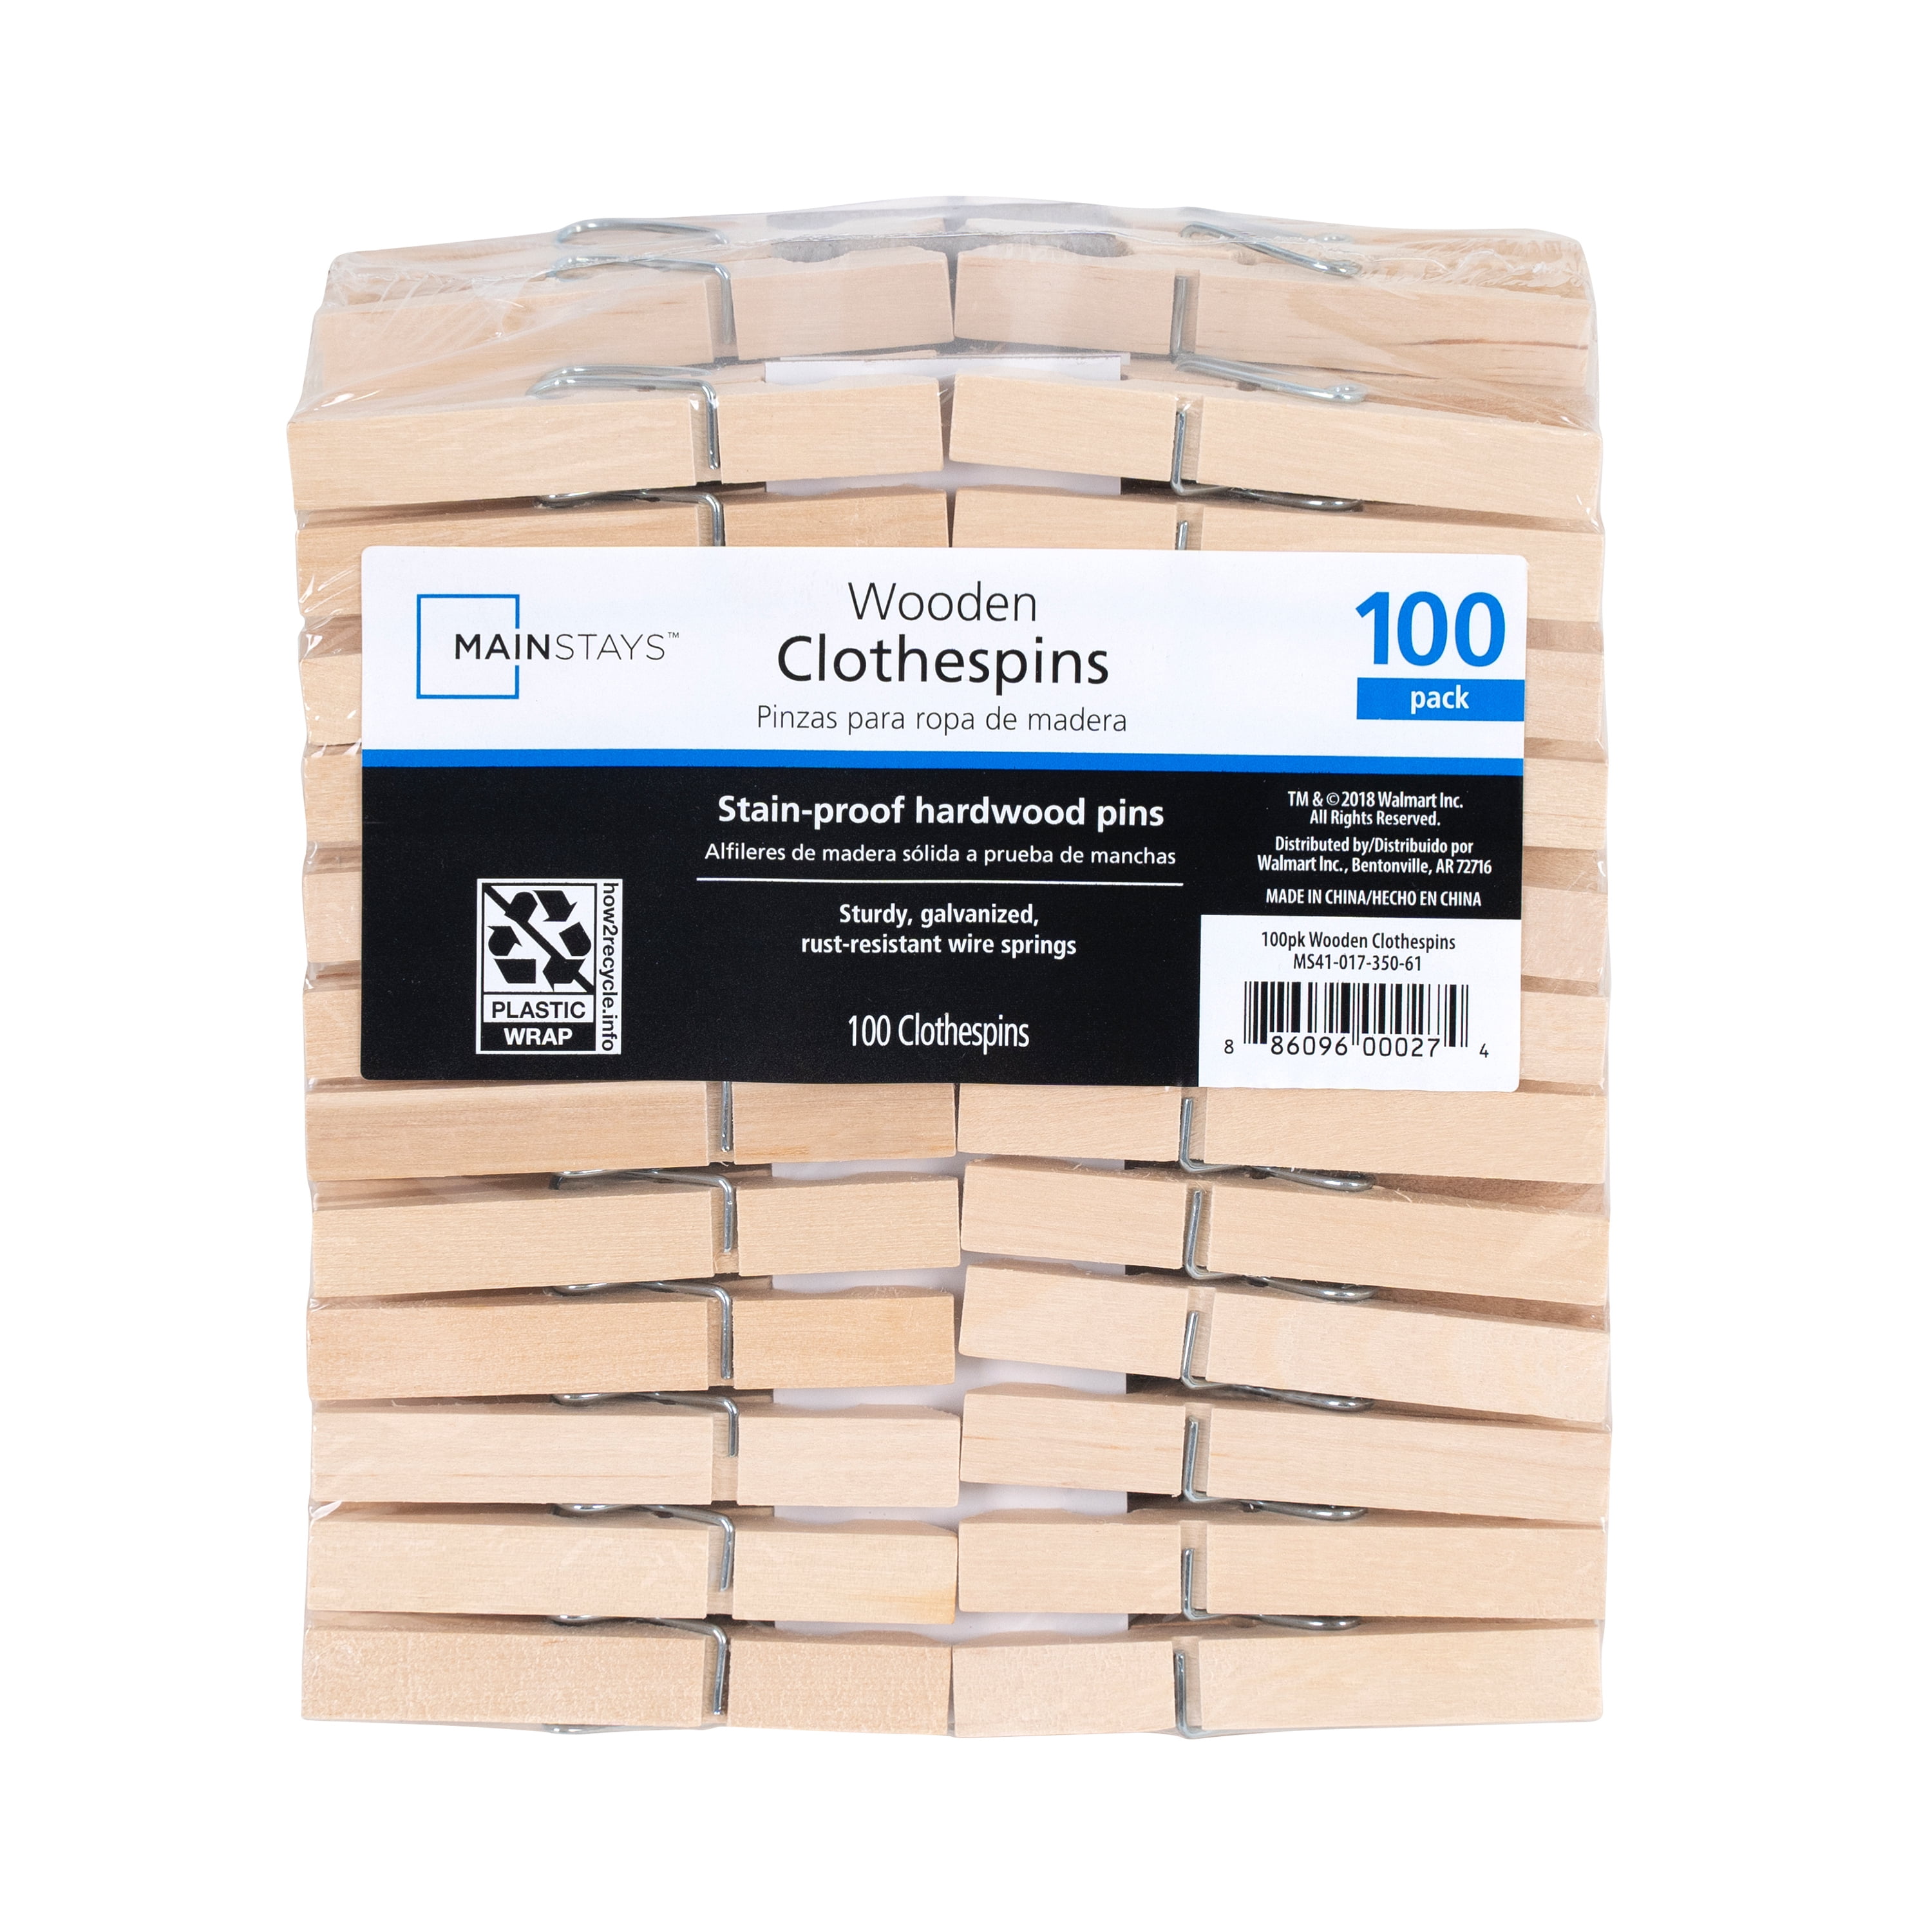 Mainstays Clothespins 100 Pack